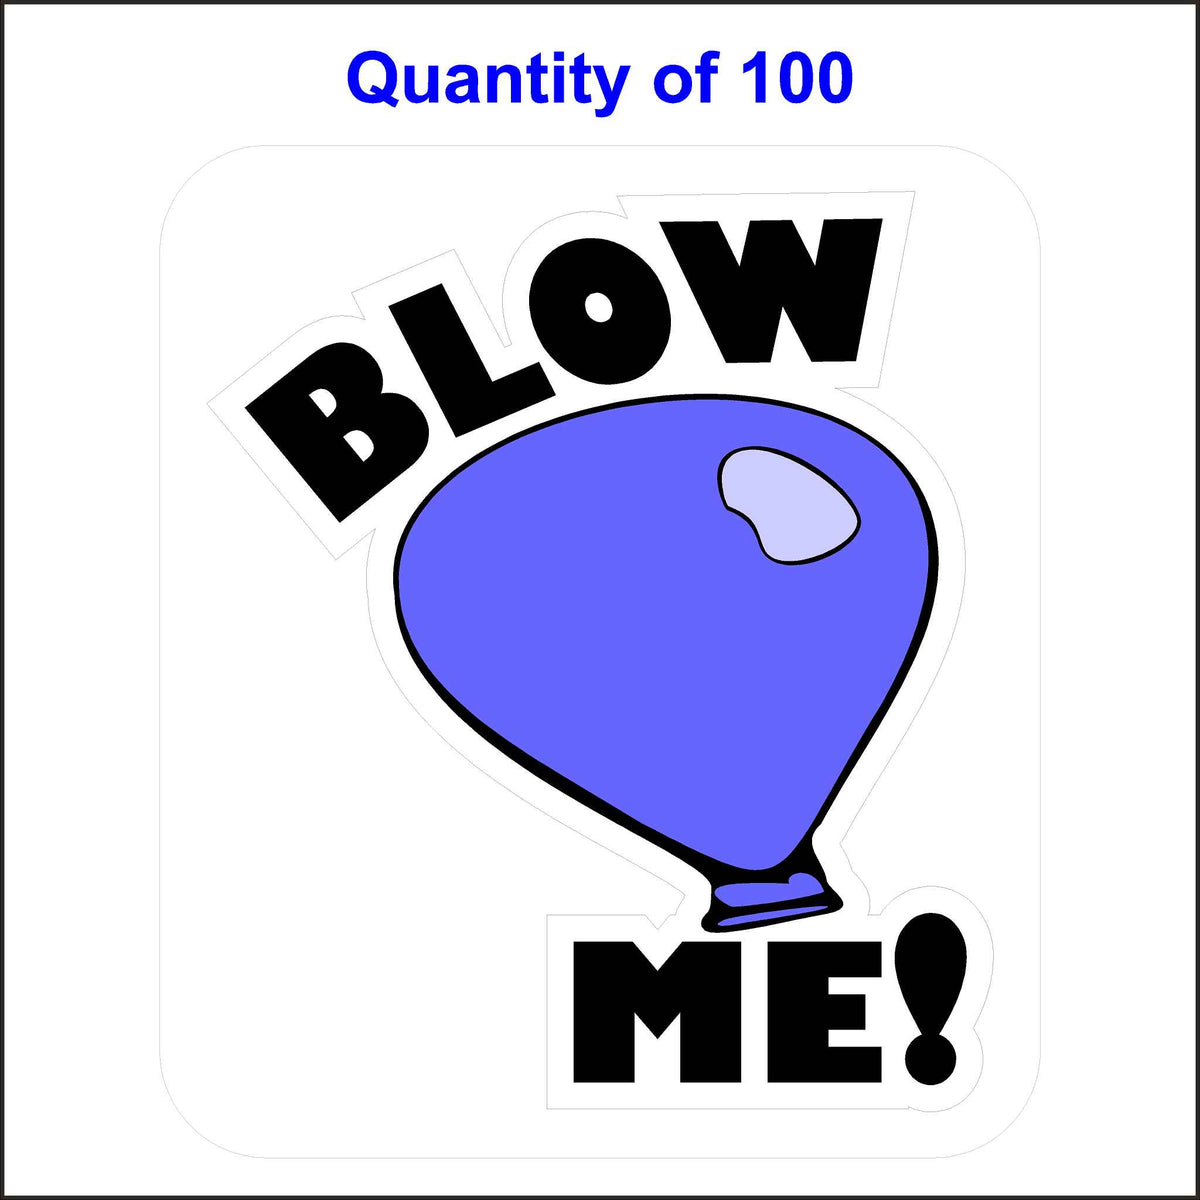 100 Blow Me Hard Hat Stickers. Printed in Black Are the Words Blow Me! They Wrap Around a Purple Balloon.